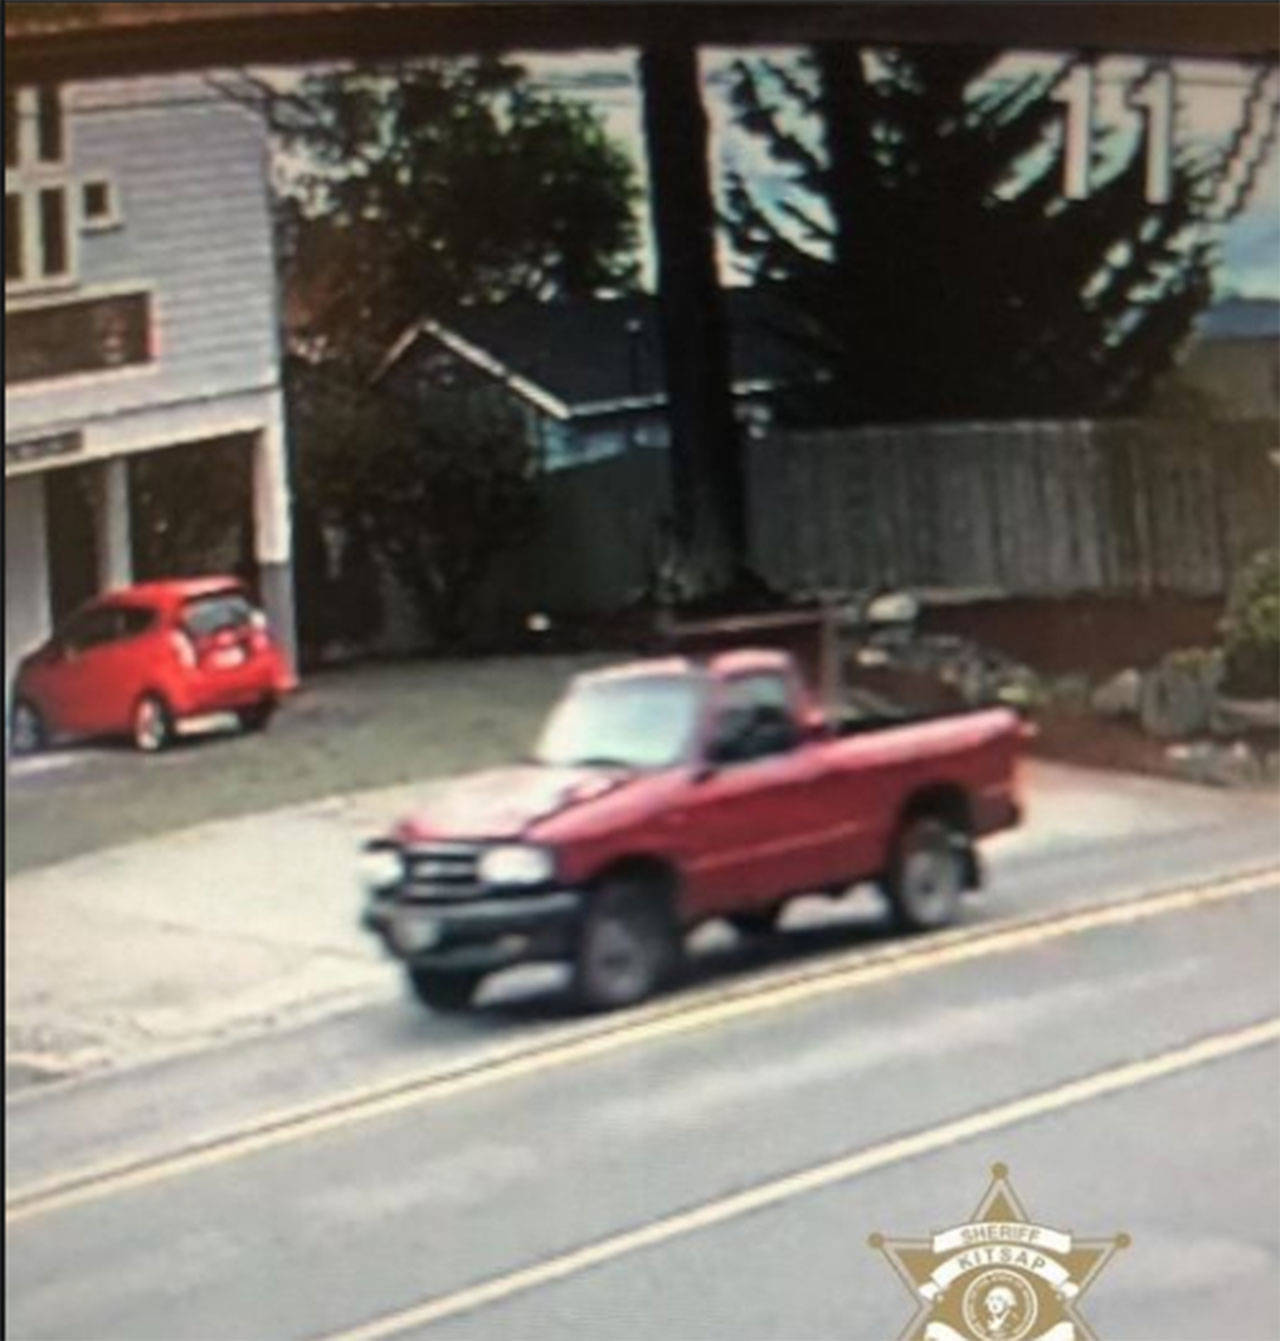 KCSO has provided a photo of the suspect vehicle involved in a hit and run in Suquamish.